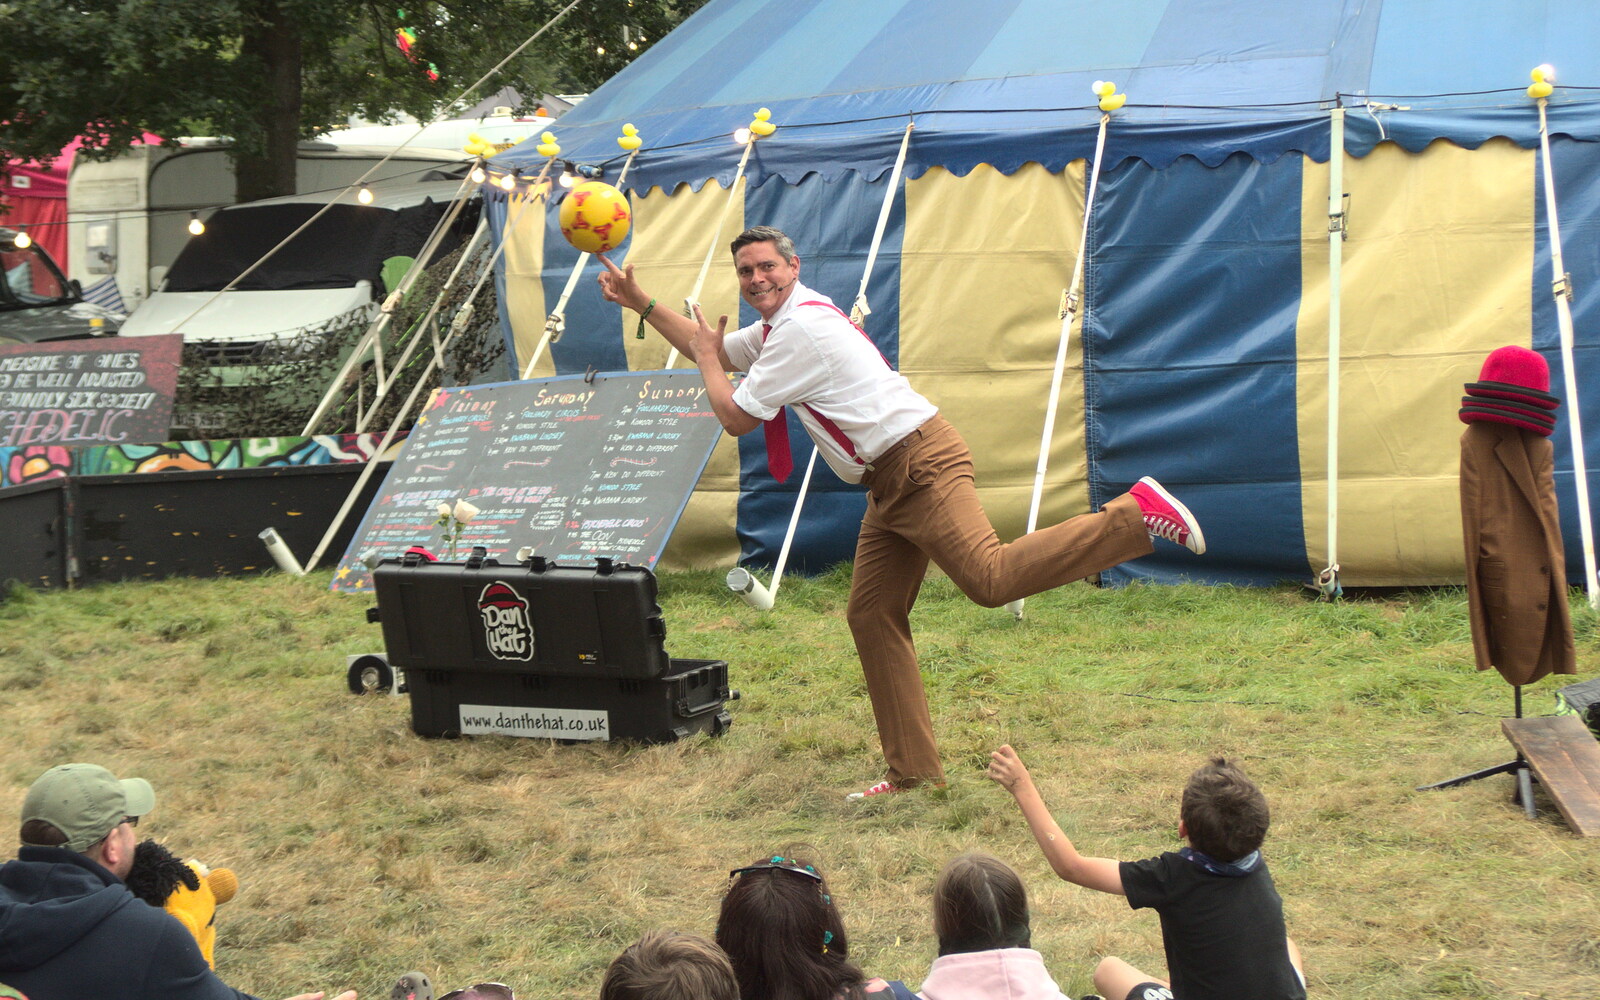 Dan the Hat does his thing from Maui Waui Festival, Hill Farm, Gressenhall, Norfolk - 28th August 2021